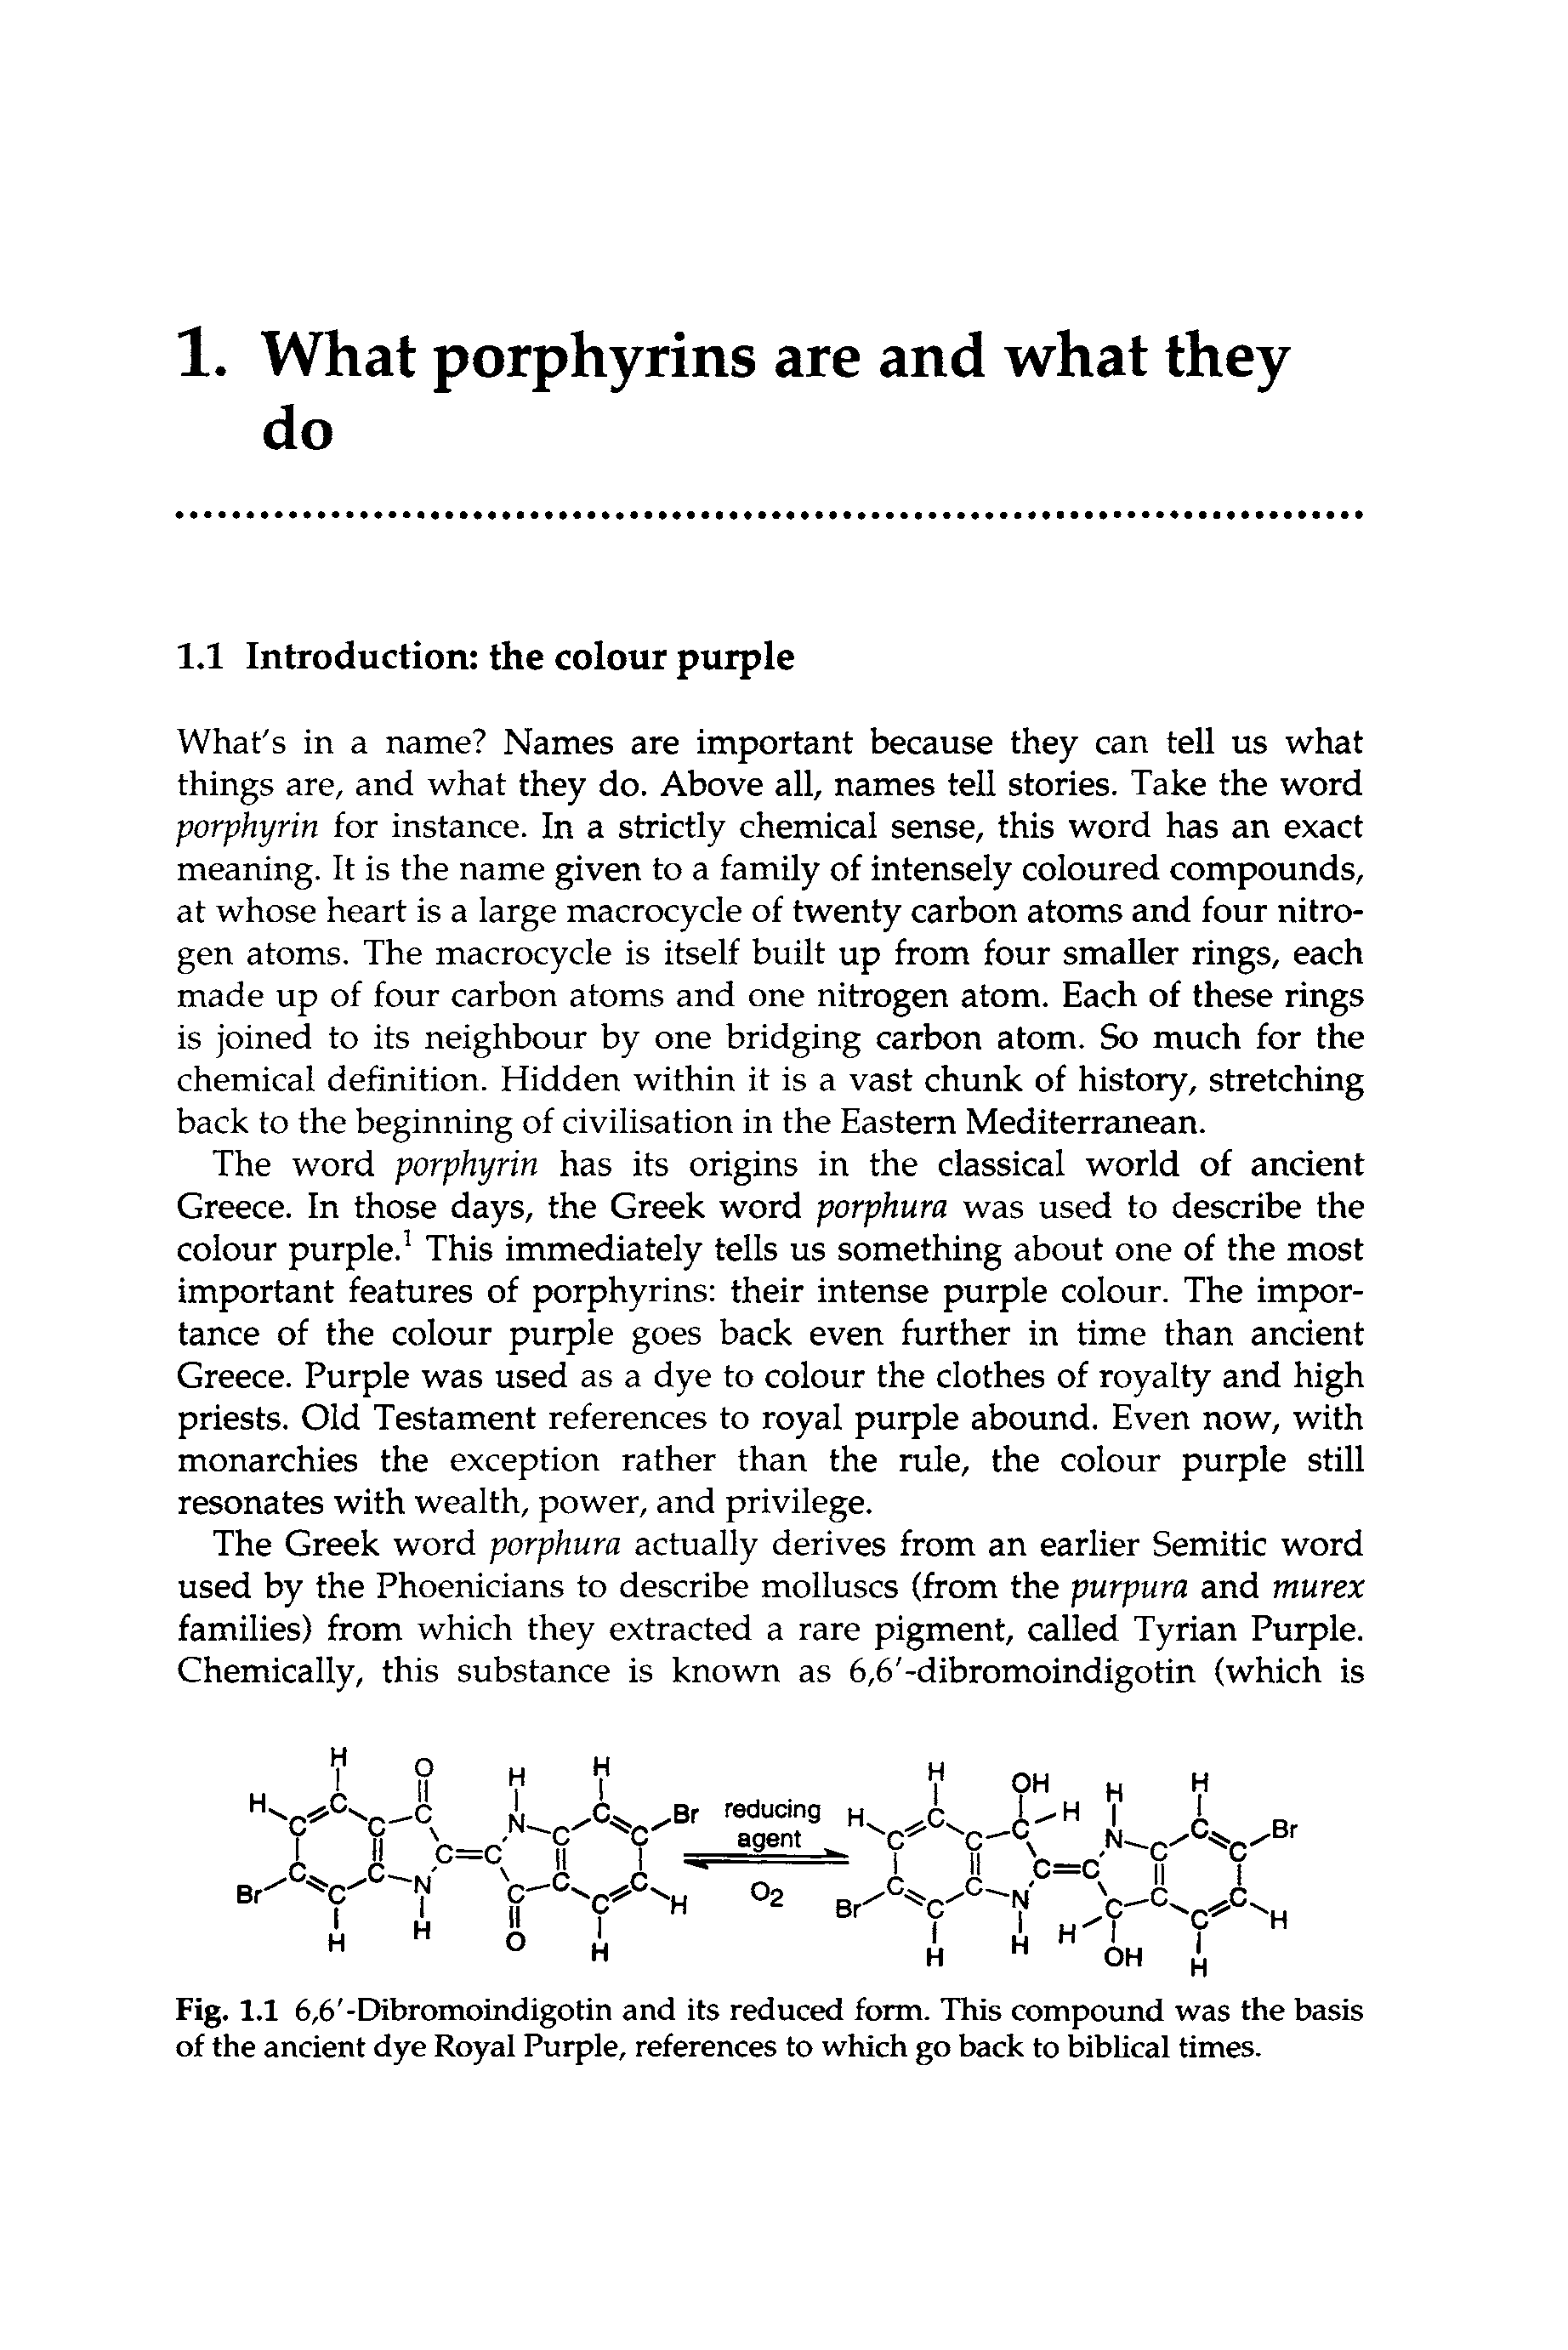 Fig. 1.1 6,6 -Dibromoindigotin and its reduced form. This compound was the basis of the ancient dye Royal Purple, references to which go back to biblical times.